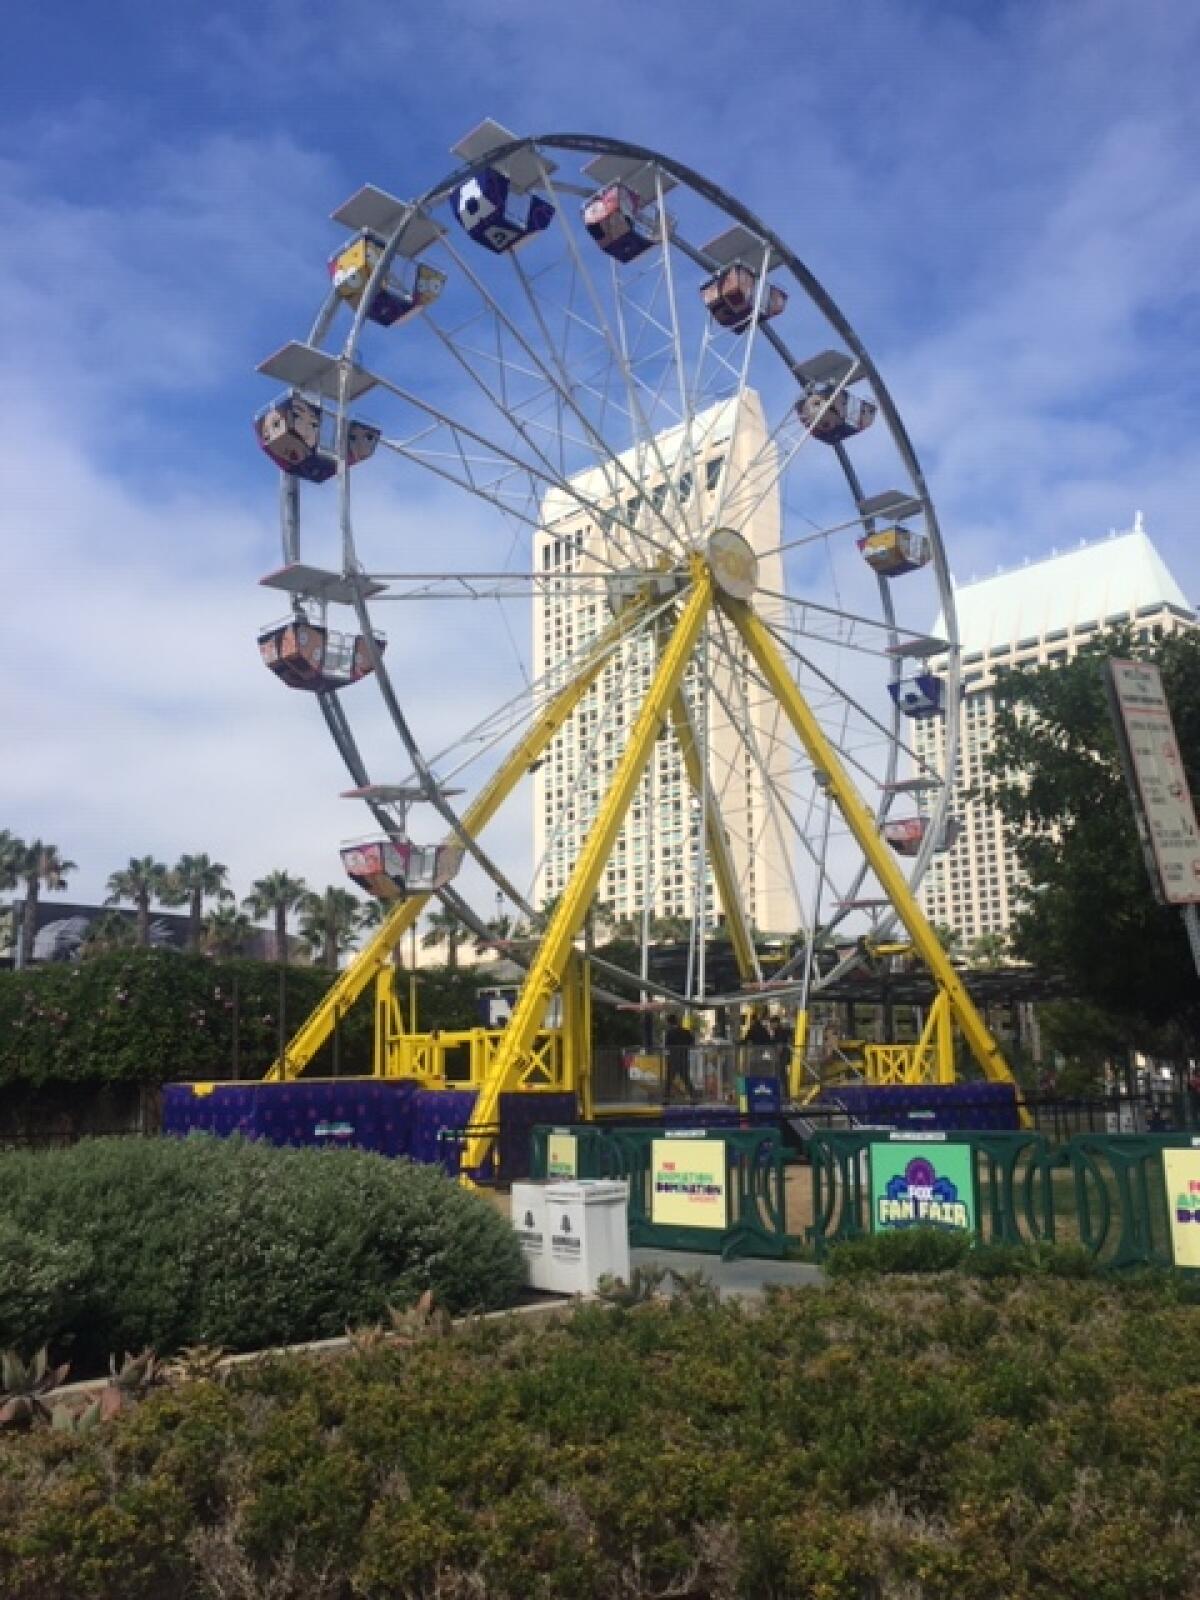 Free Ferris wheel rides are being offered at the Fox Fun Fair at Harbor Drive and Front Street in San Diego this weekend.